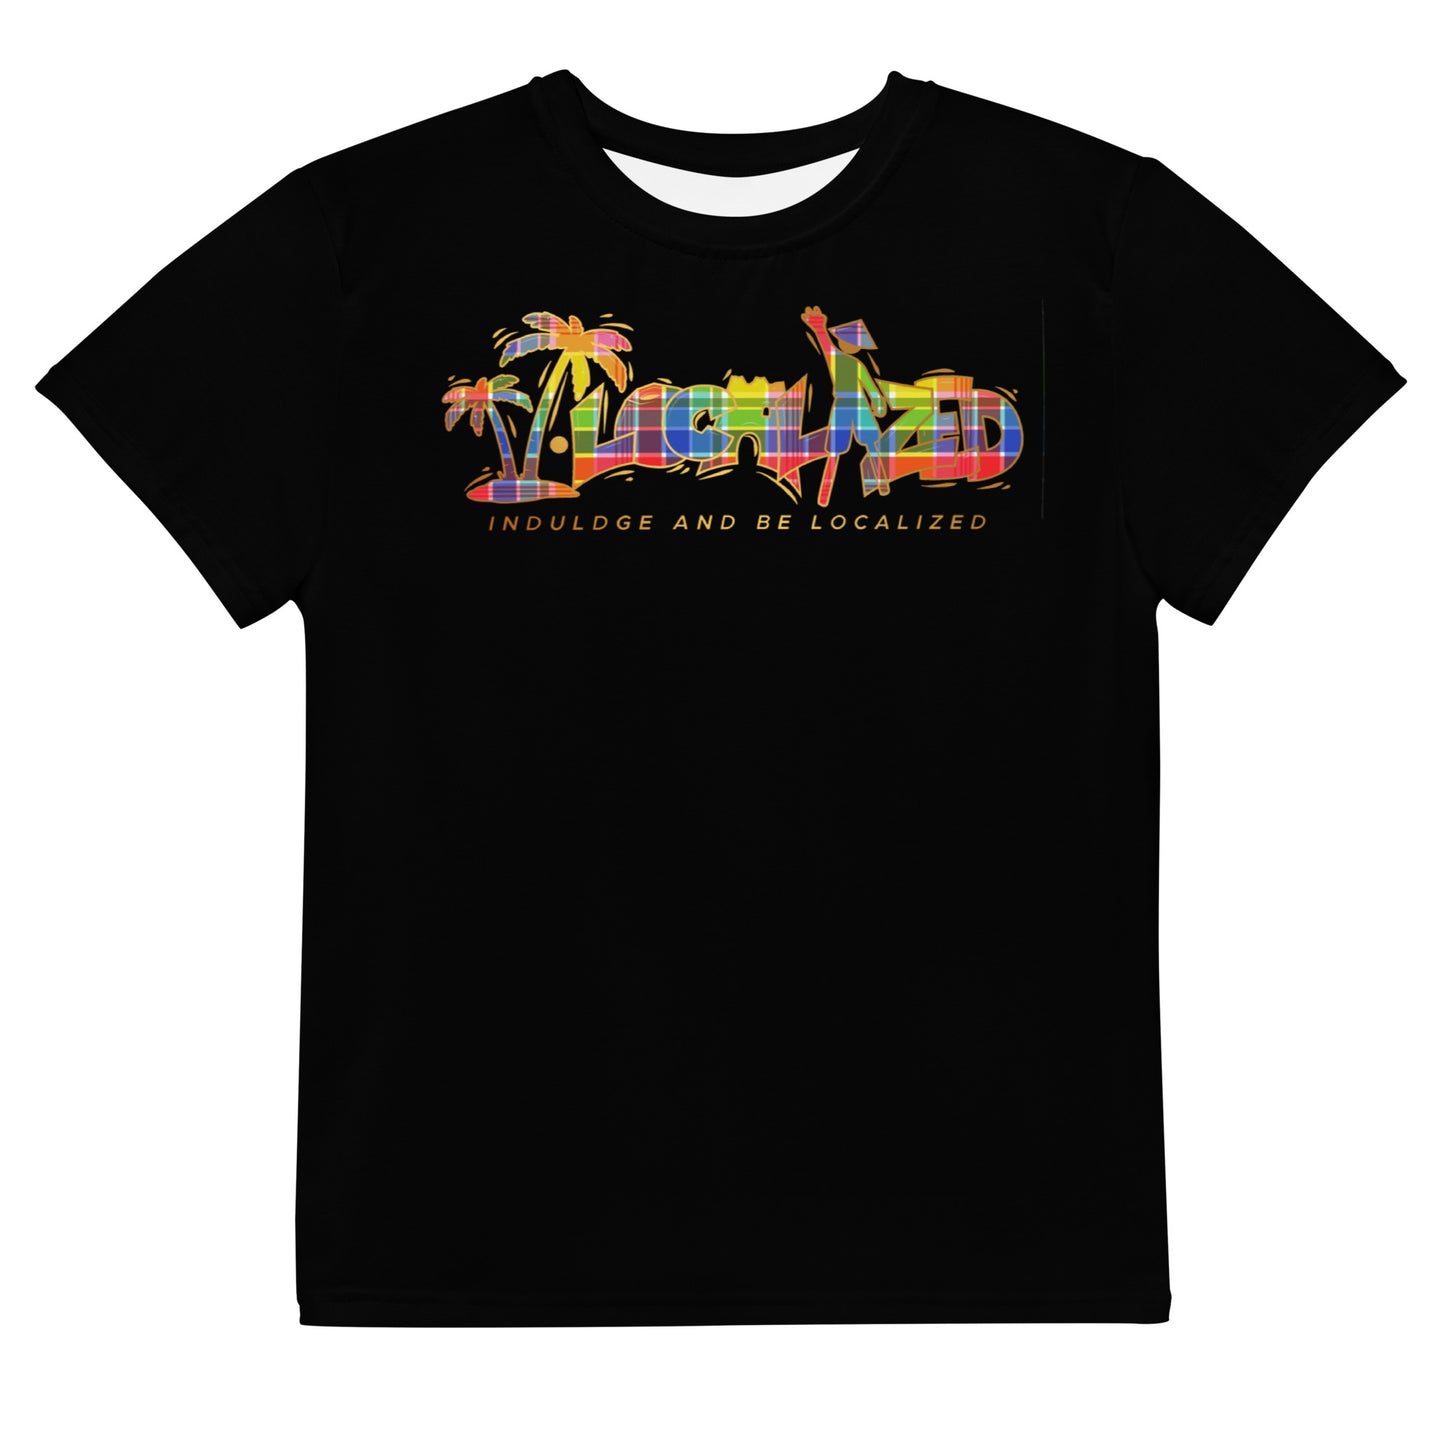 Black V.Localized (Madras) Youth Dry-Fit T-Shirt